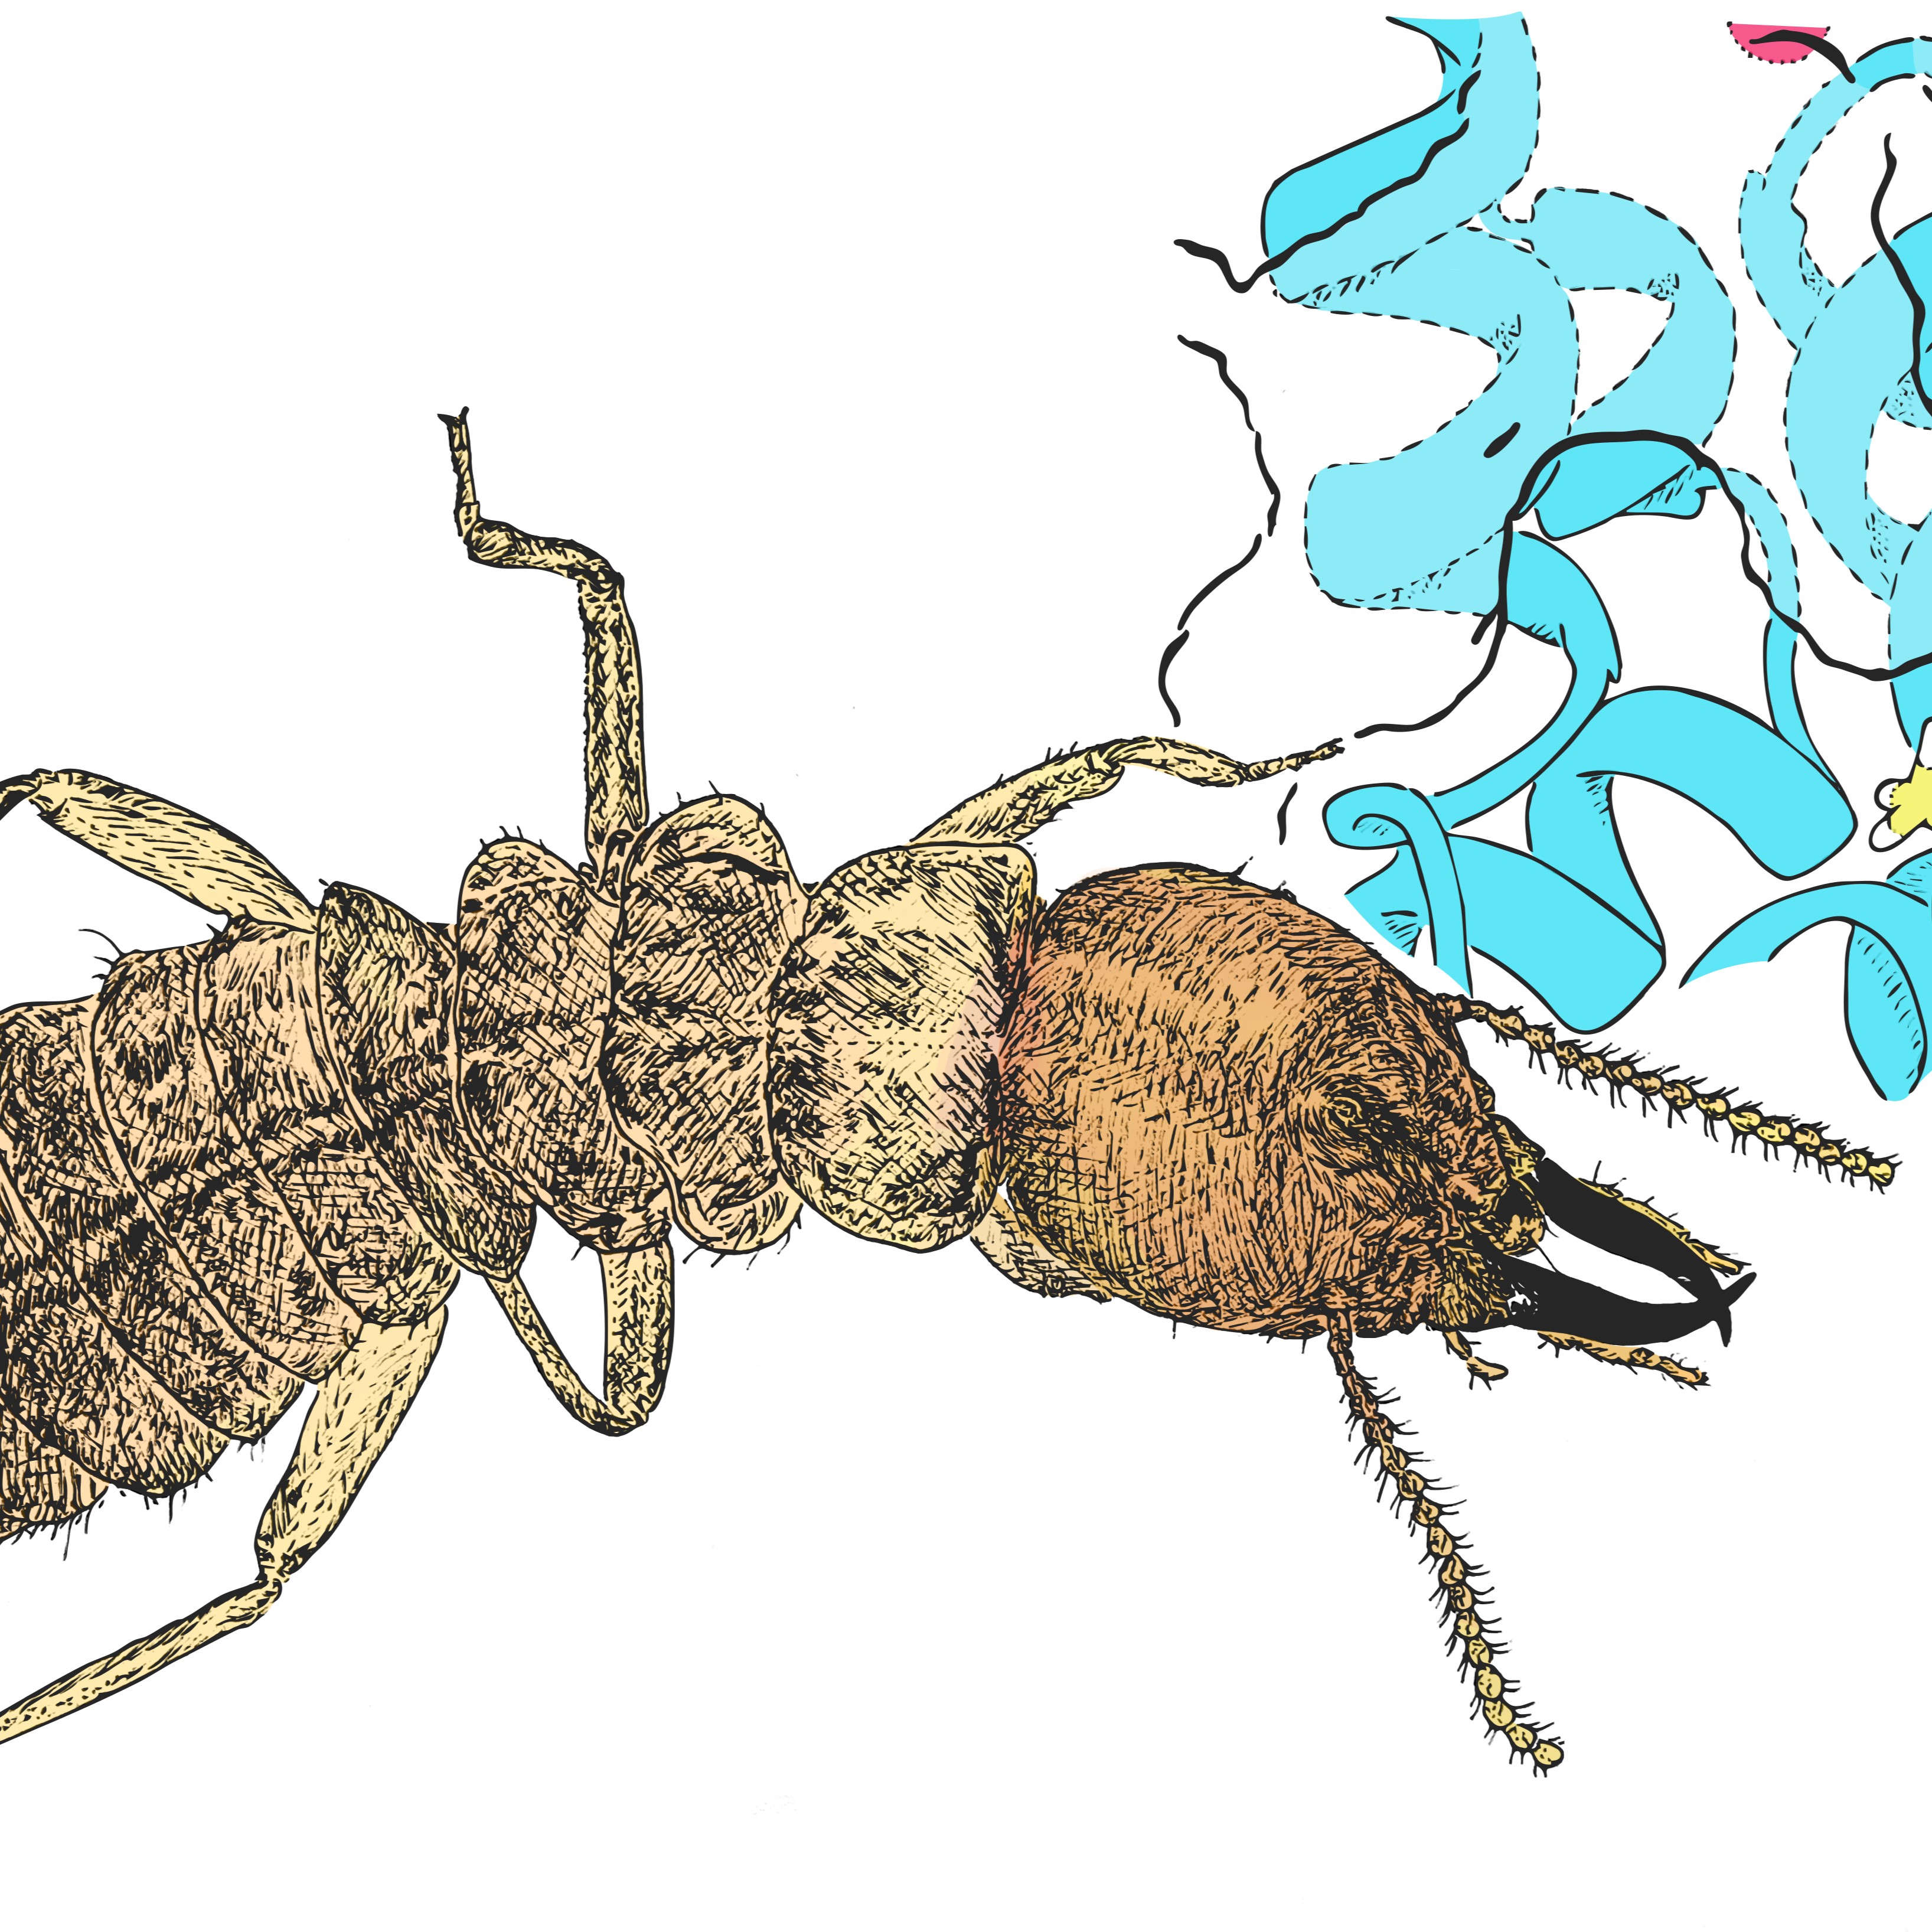 Biochemical Basis of Termite Ecological Success